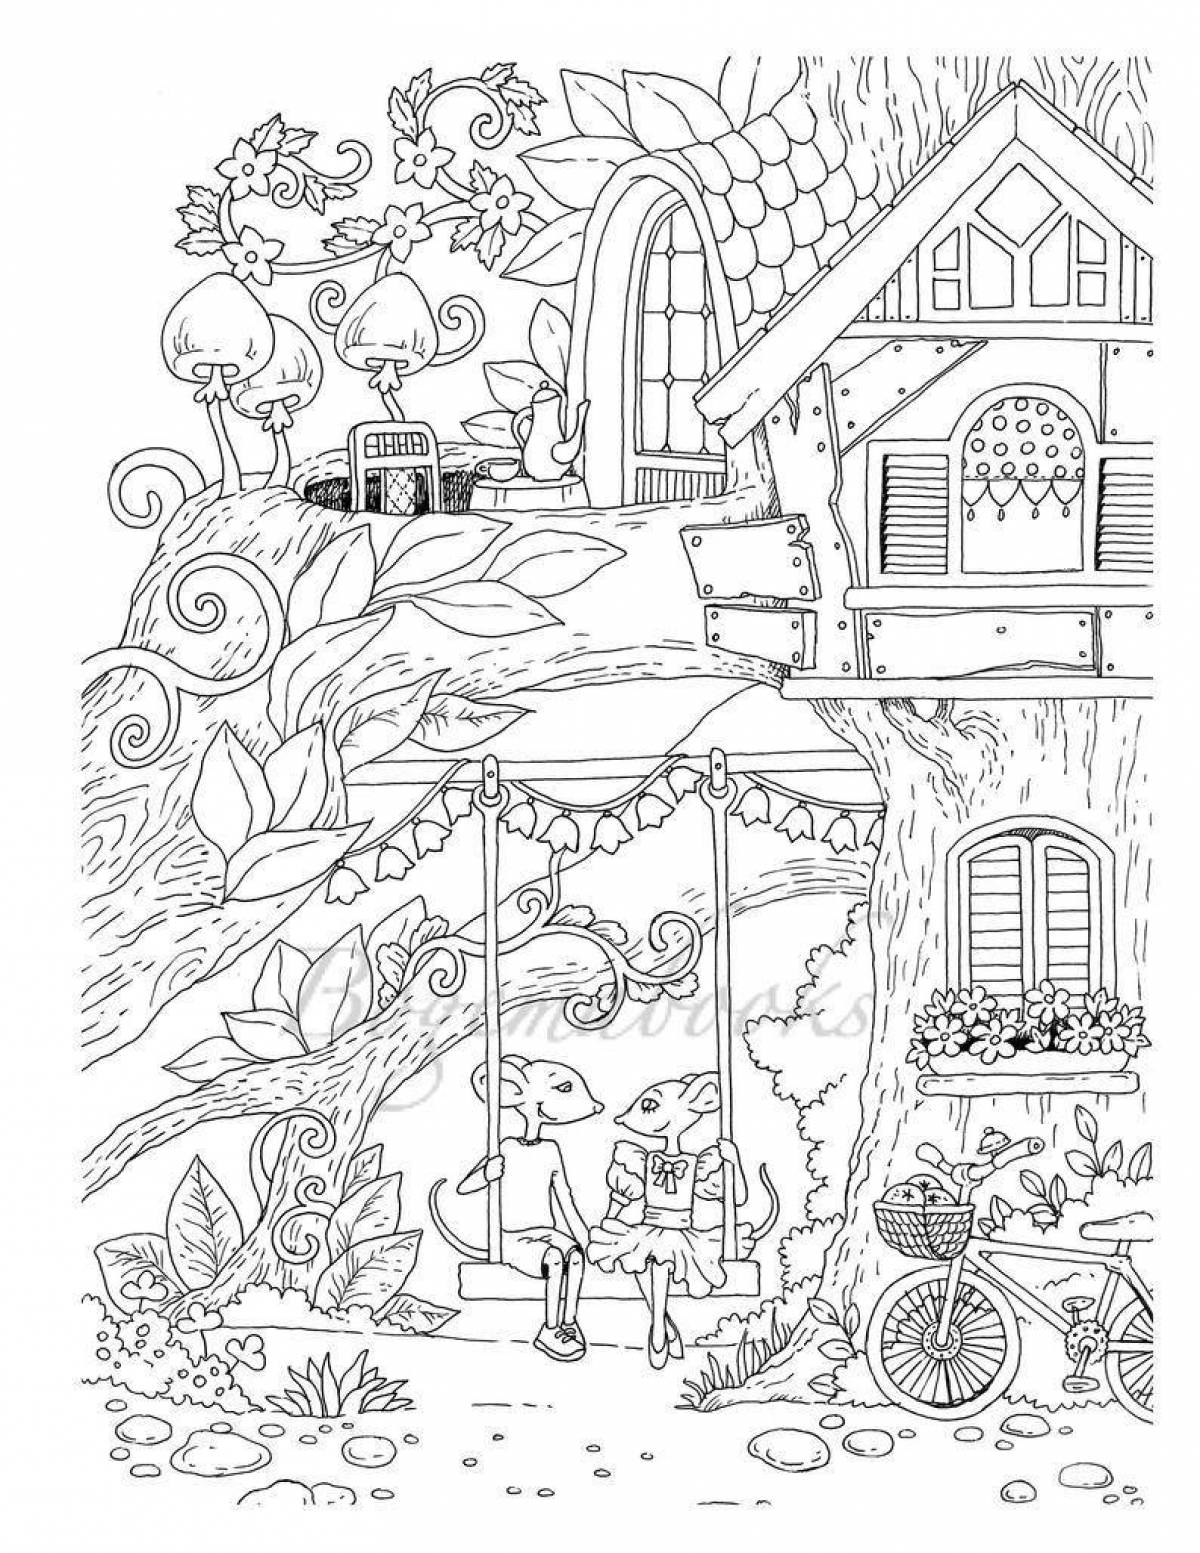 Coloring book beautiful house for adults